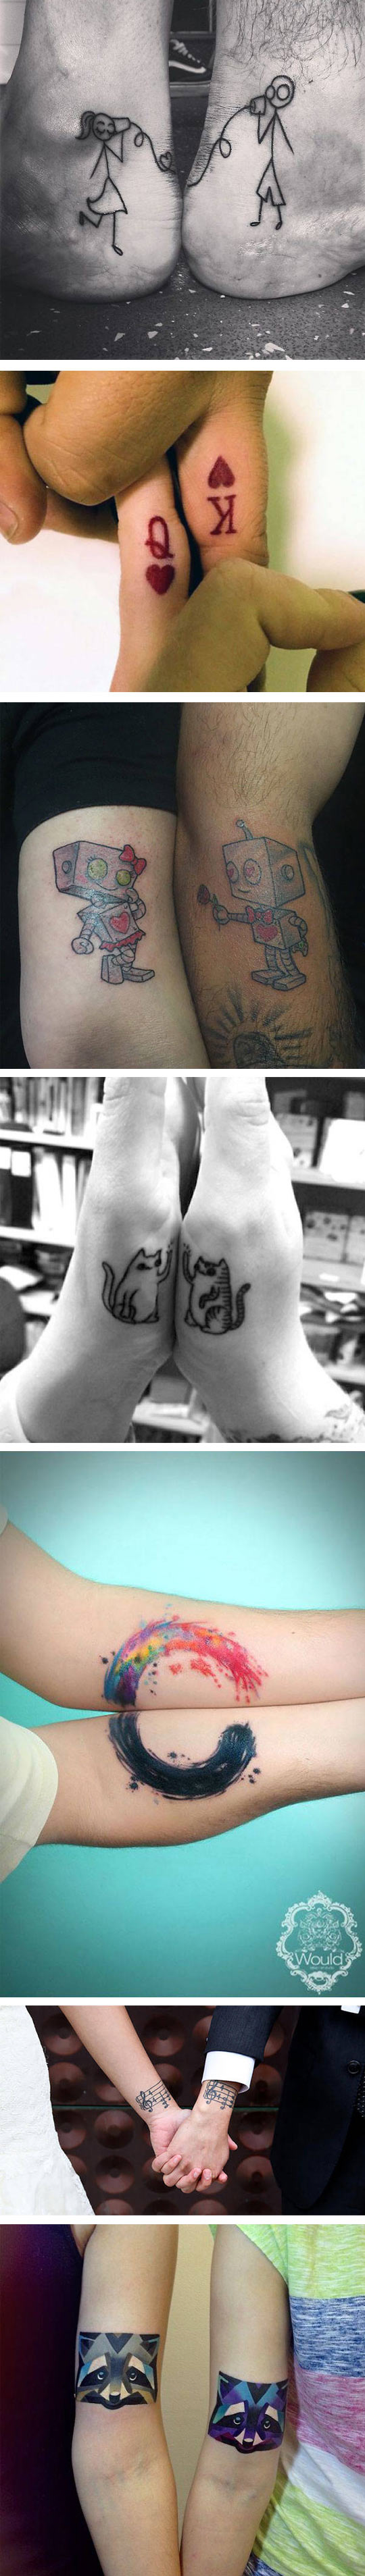 2-funny-tattoo-couple-together-birds-cards